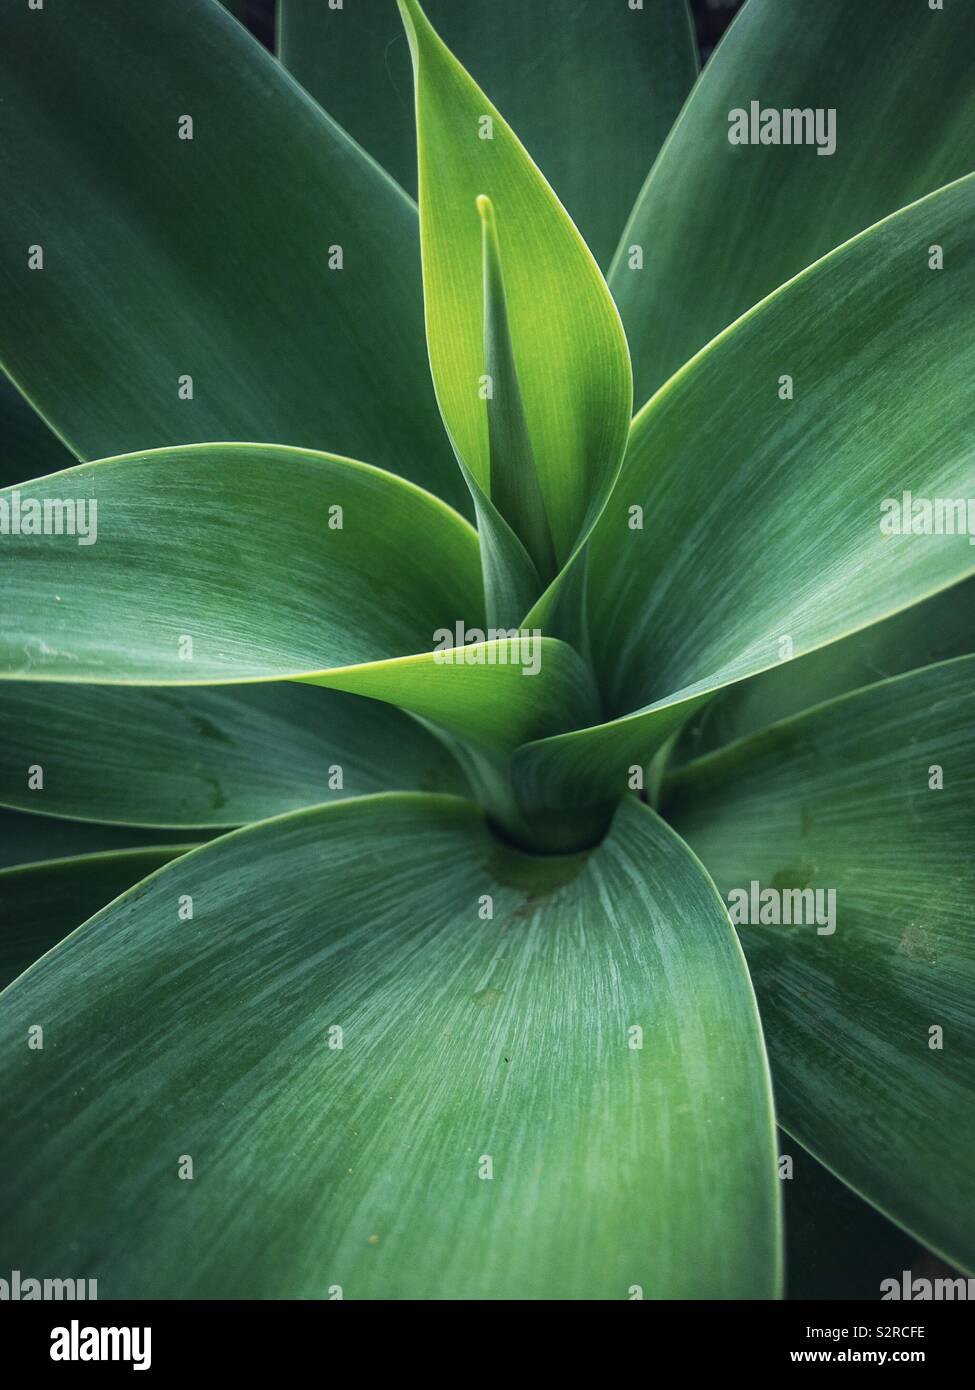 Green plant leaves. Stock Photo